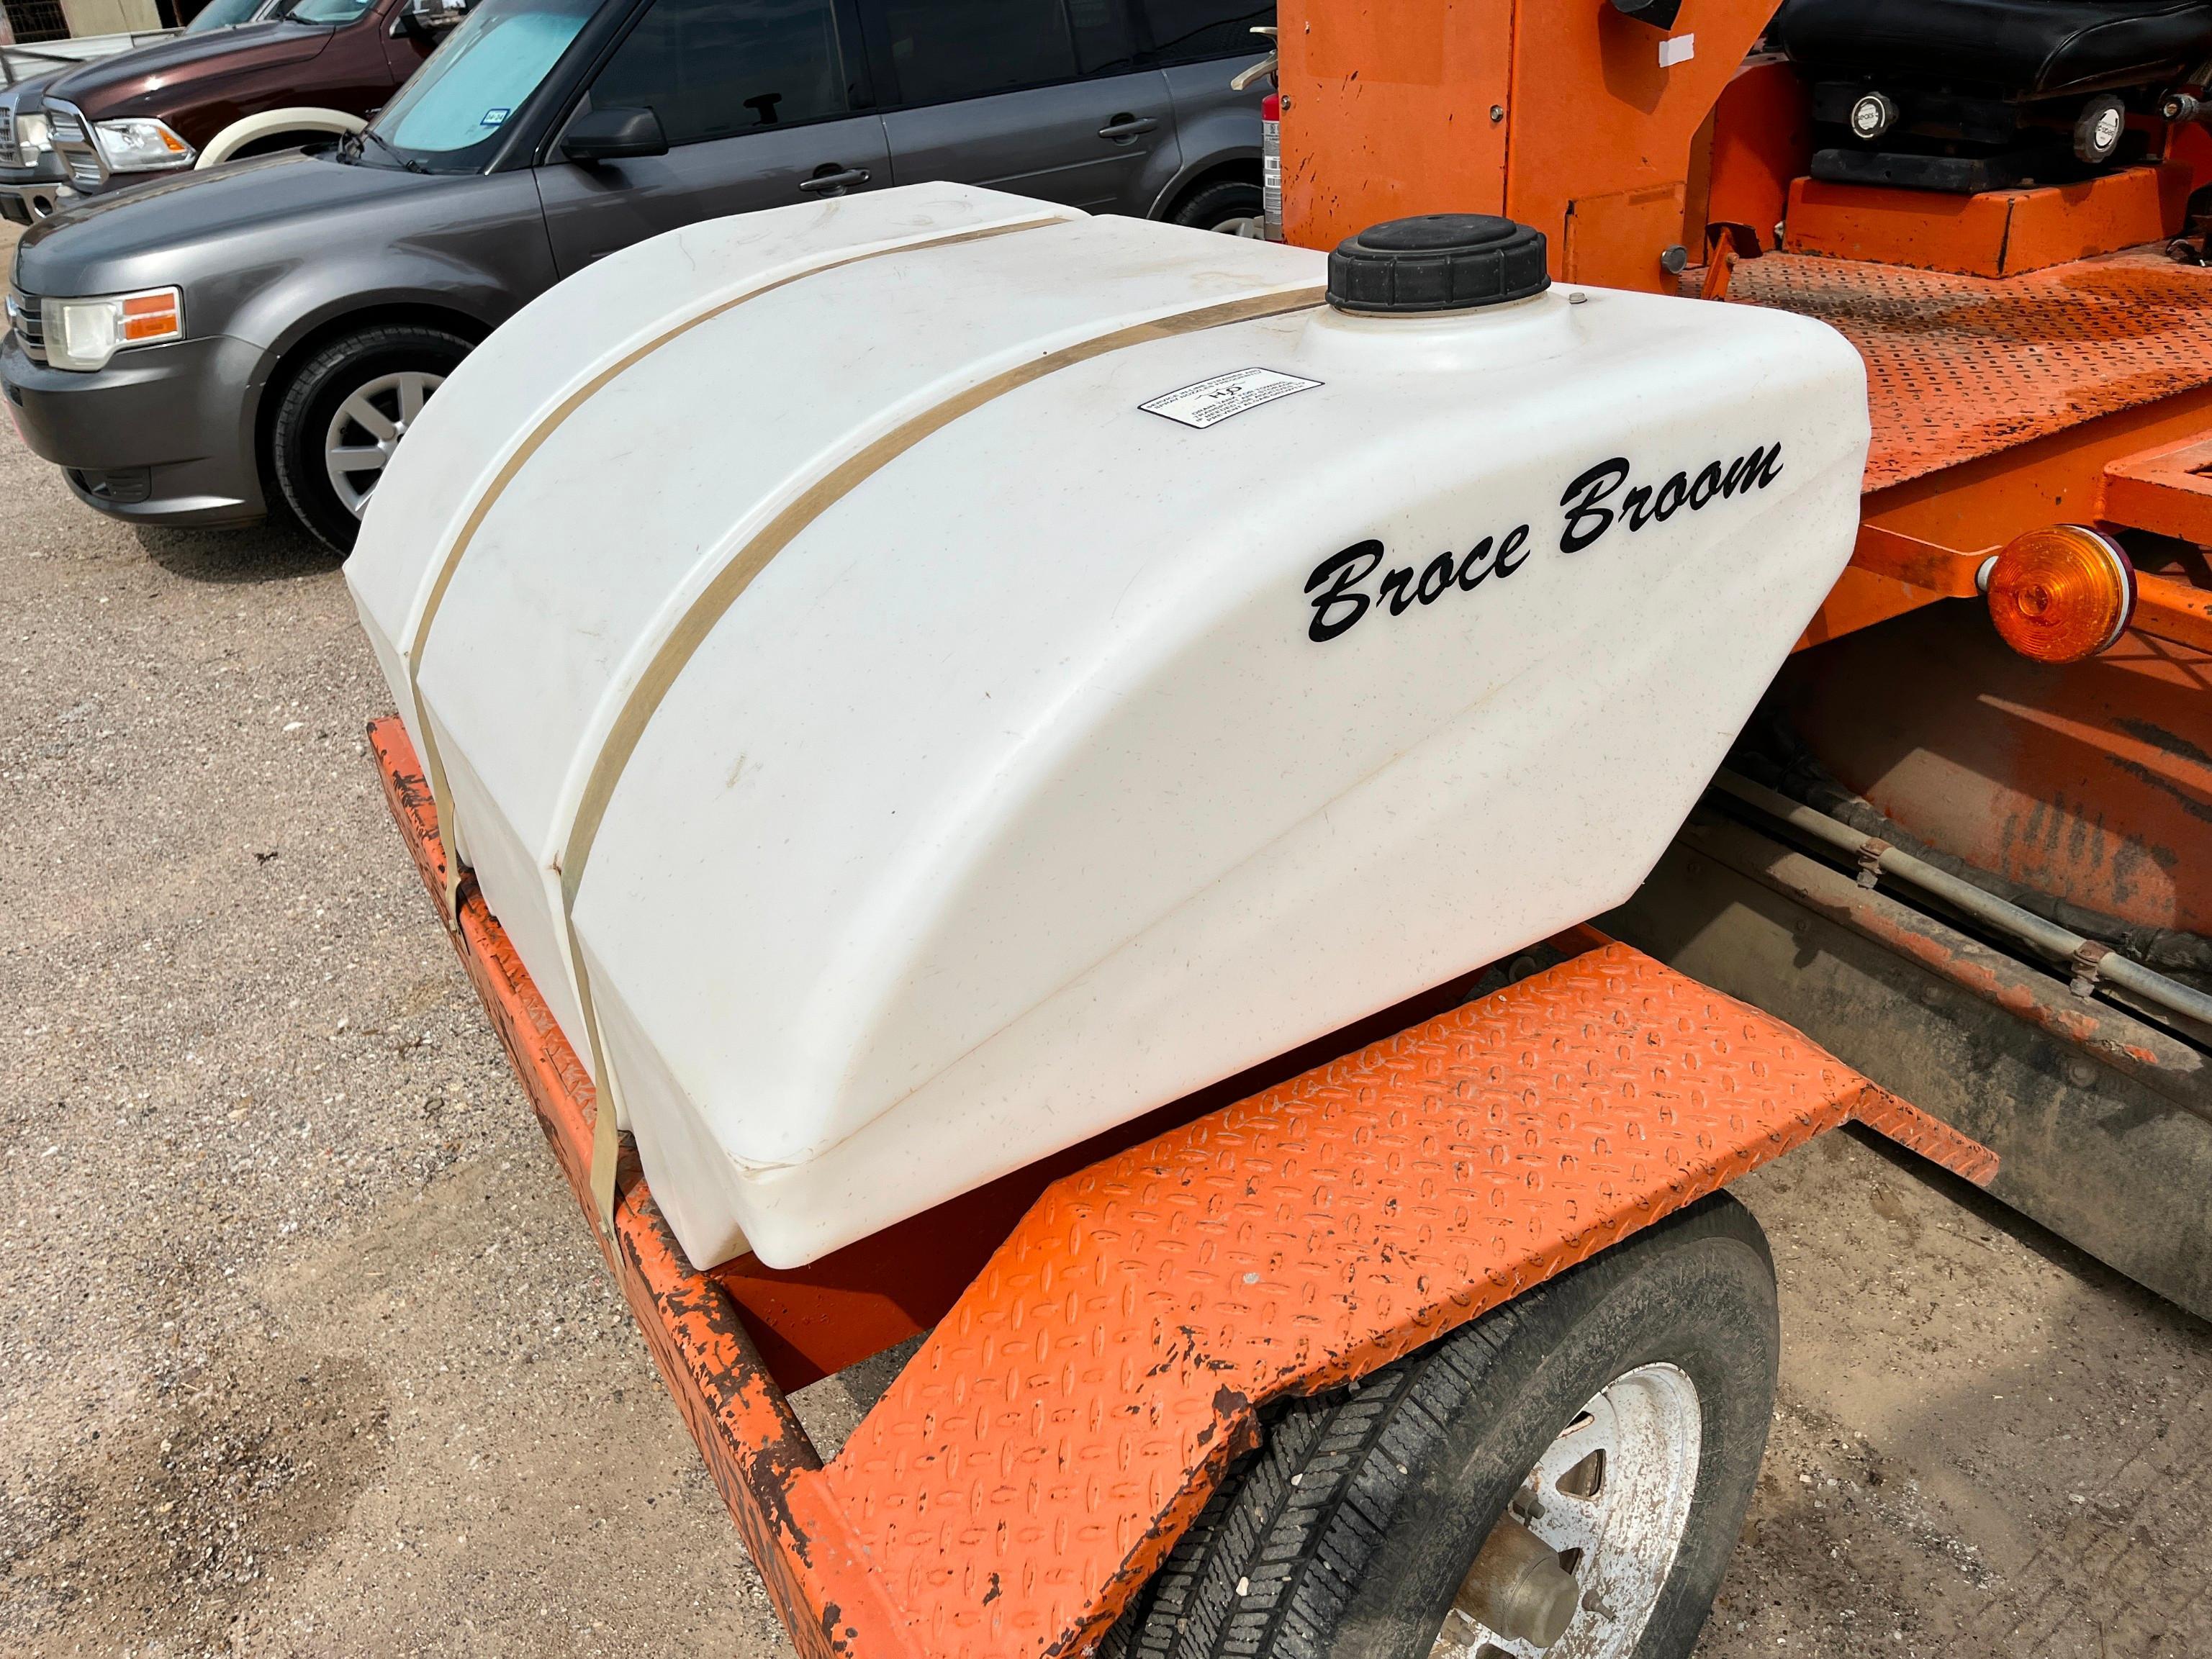 BROCE RJ350 SWEEPER SN:405431 powered by John Deere diesel engine, equipped with OROPS, 8ft. Power